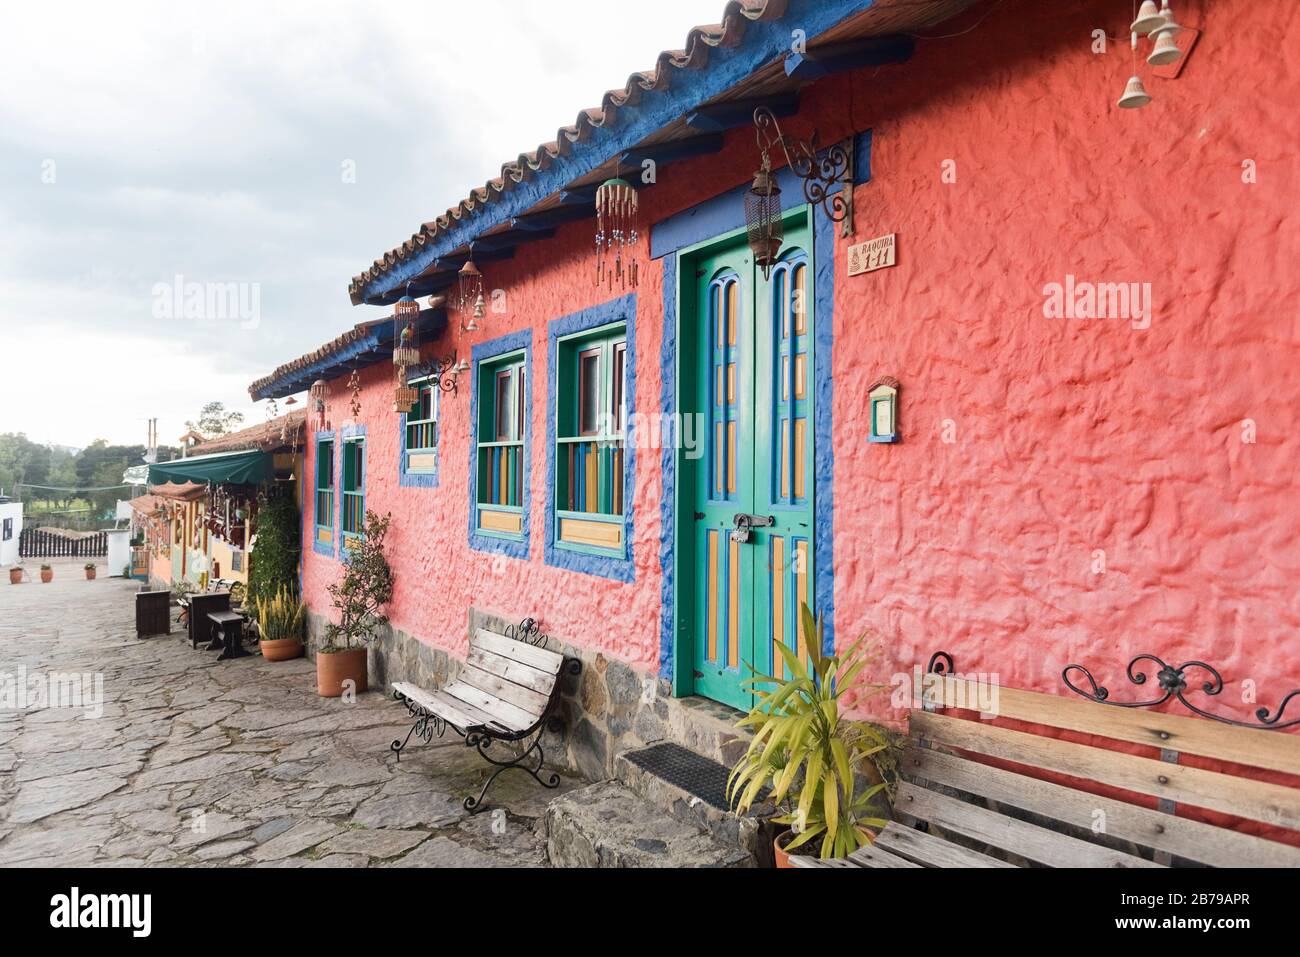 Duitama, Boyaca / Colombia; April 9, 2018: Pueblito Boyacense, a picturesque tourist spot with traditional streets and colorful facades Stock Photo